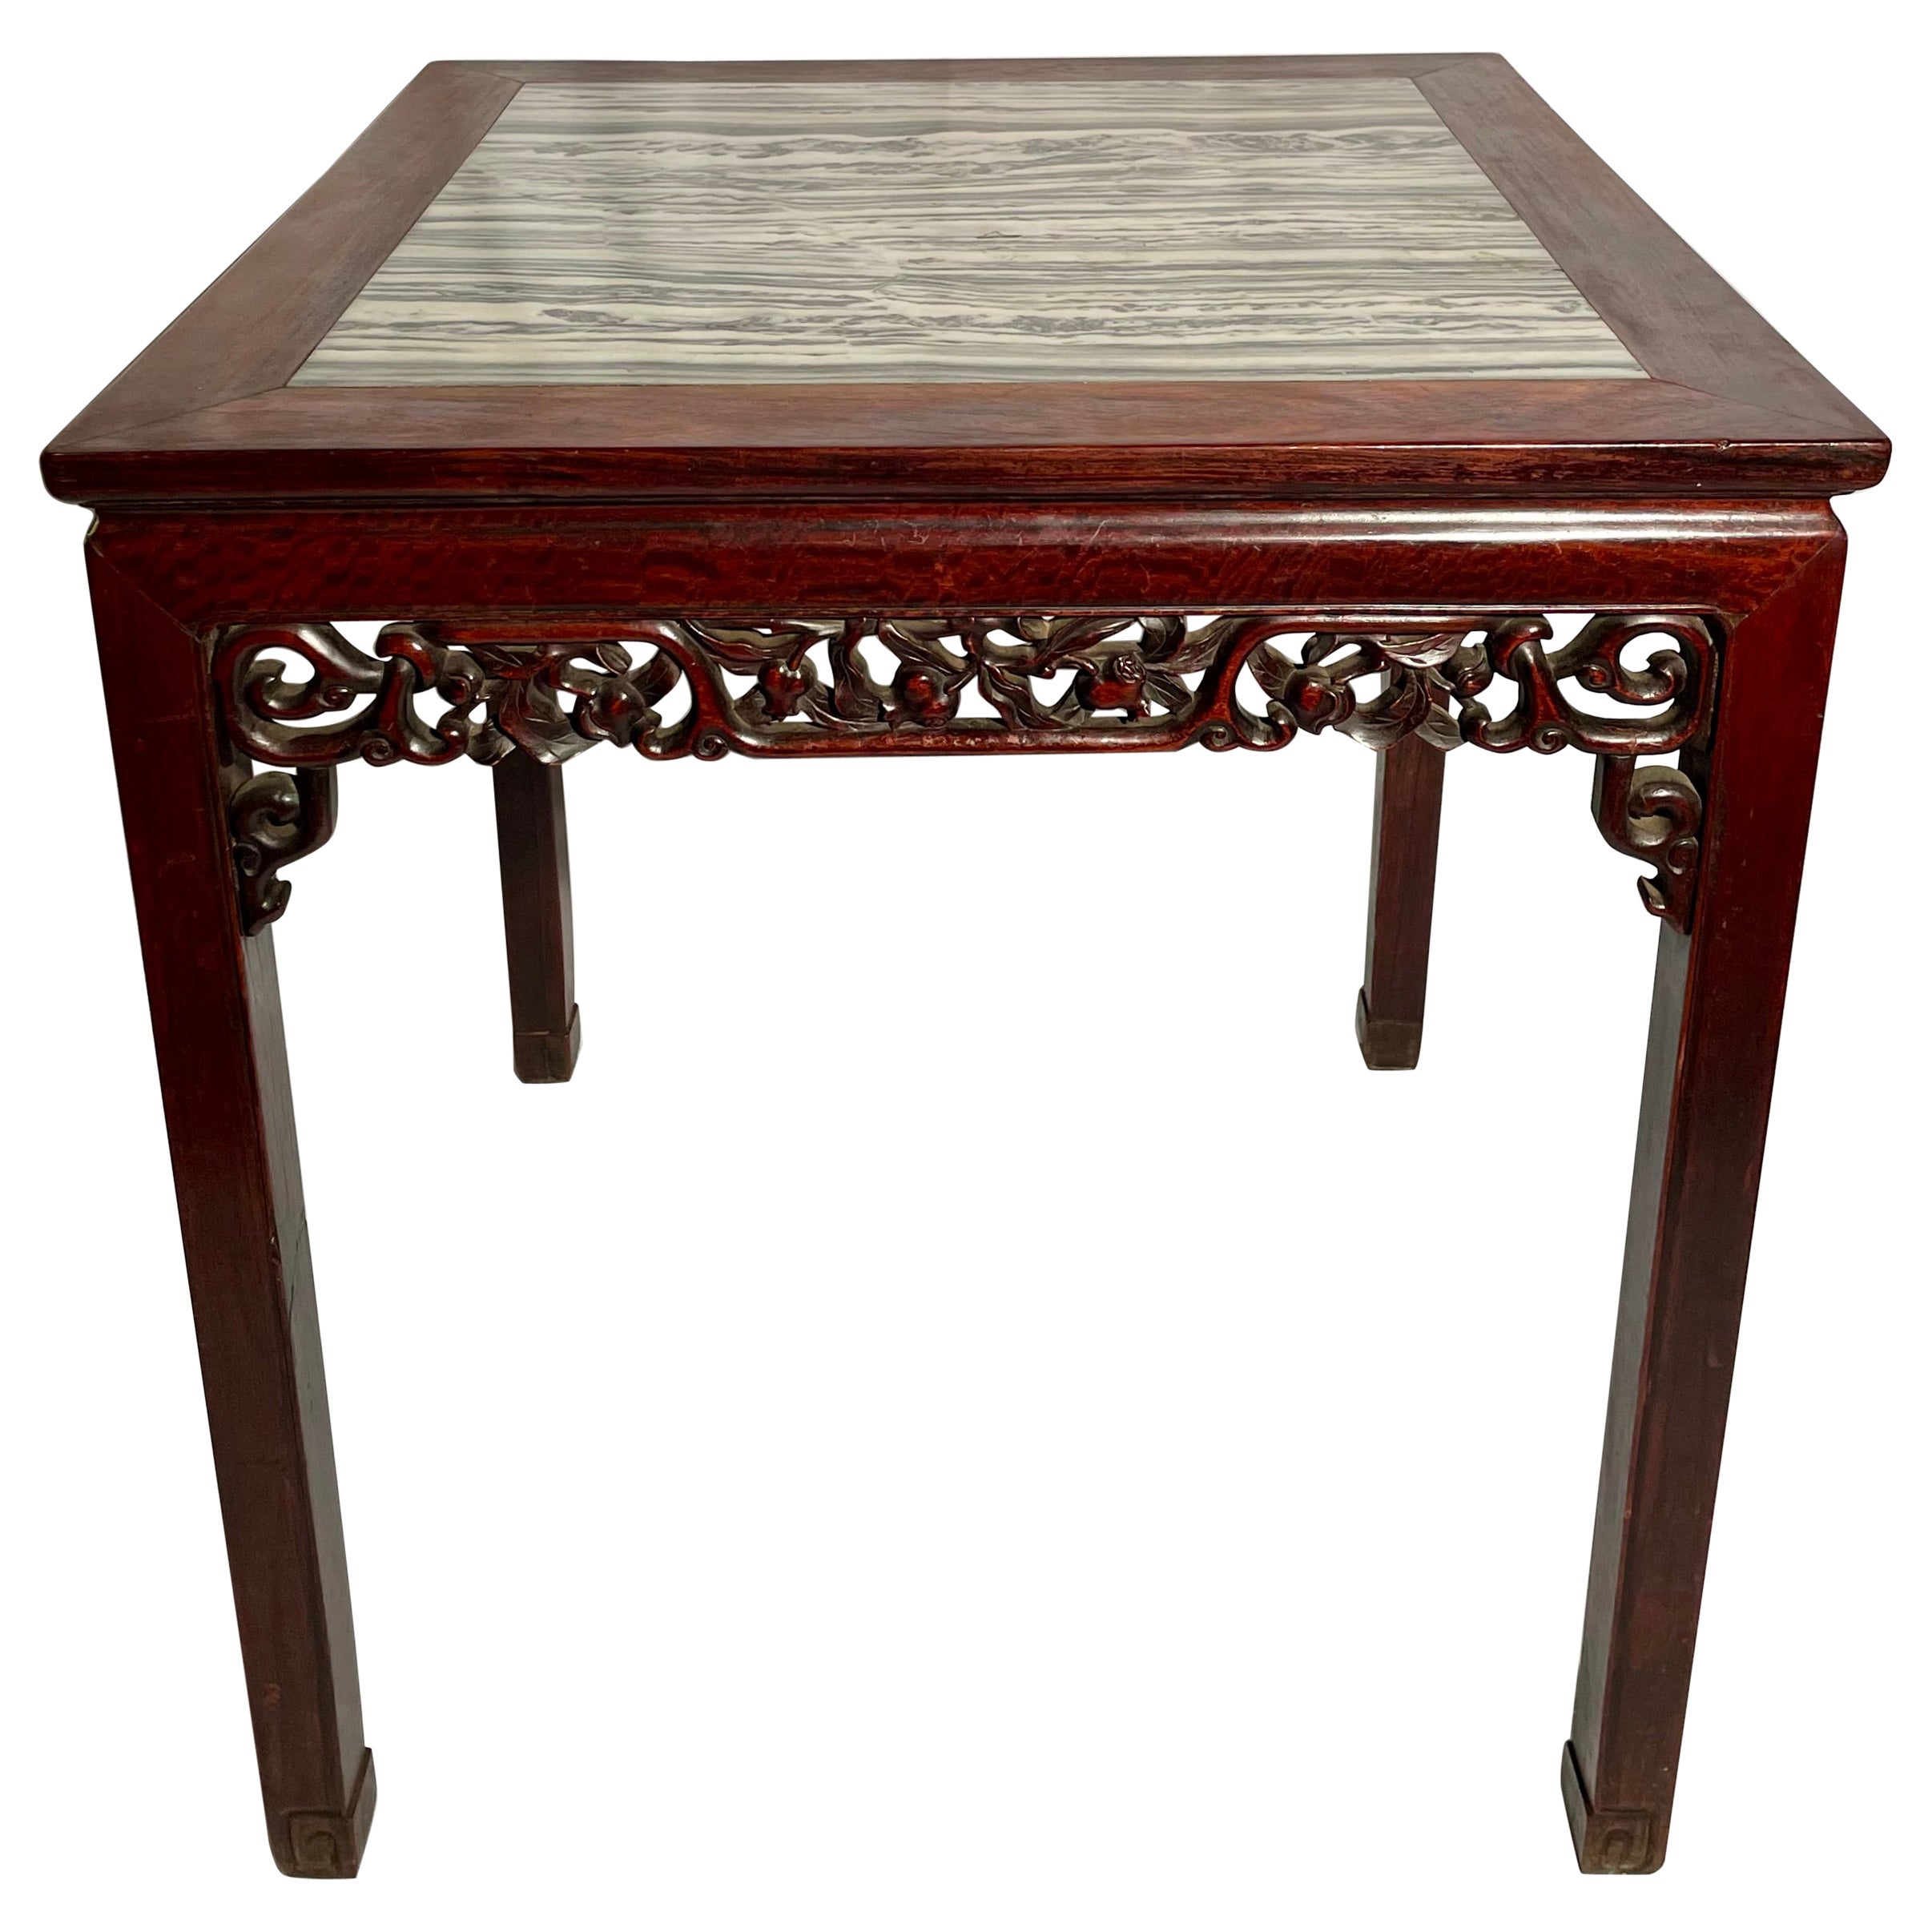 Antique Late 19th Century Chinese Marble-Top Teakwood Table, Circa 1890's.